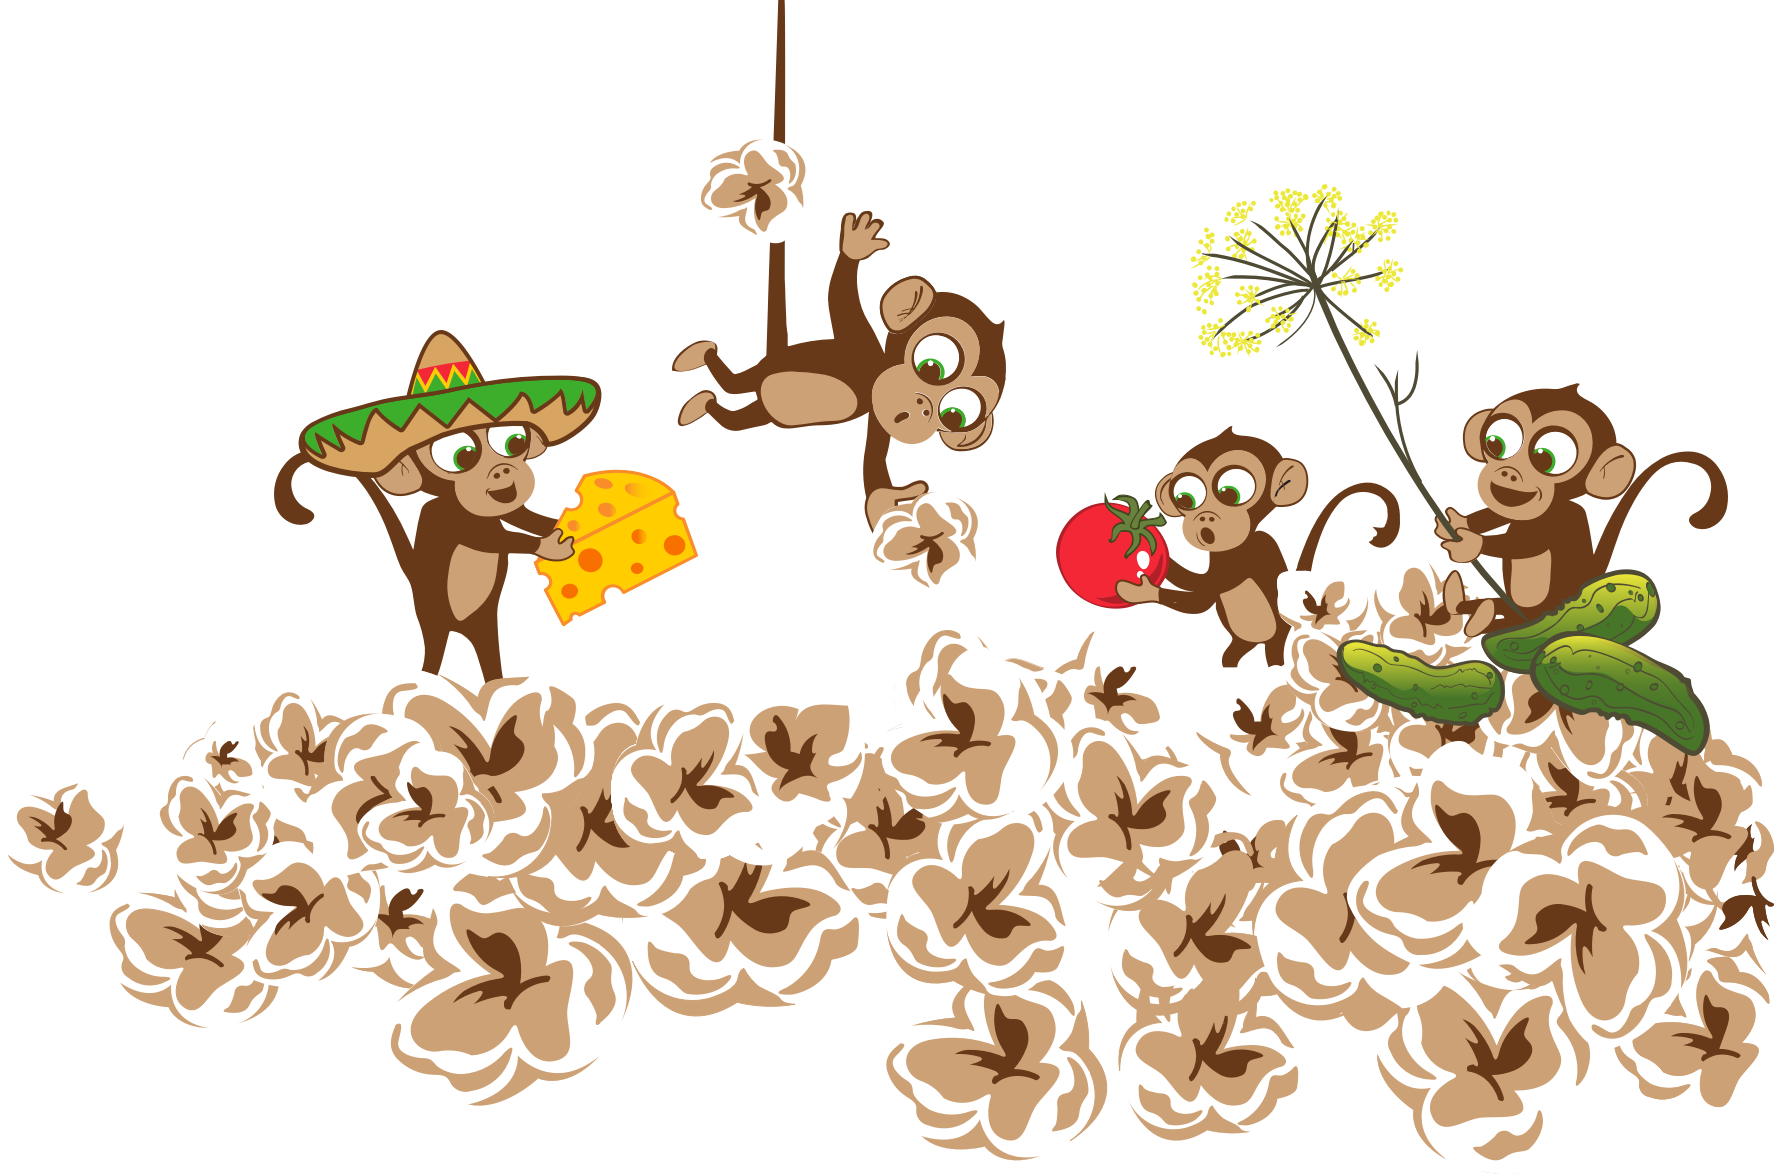 Multiple monkeys with different flavours of popcorn